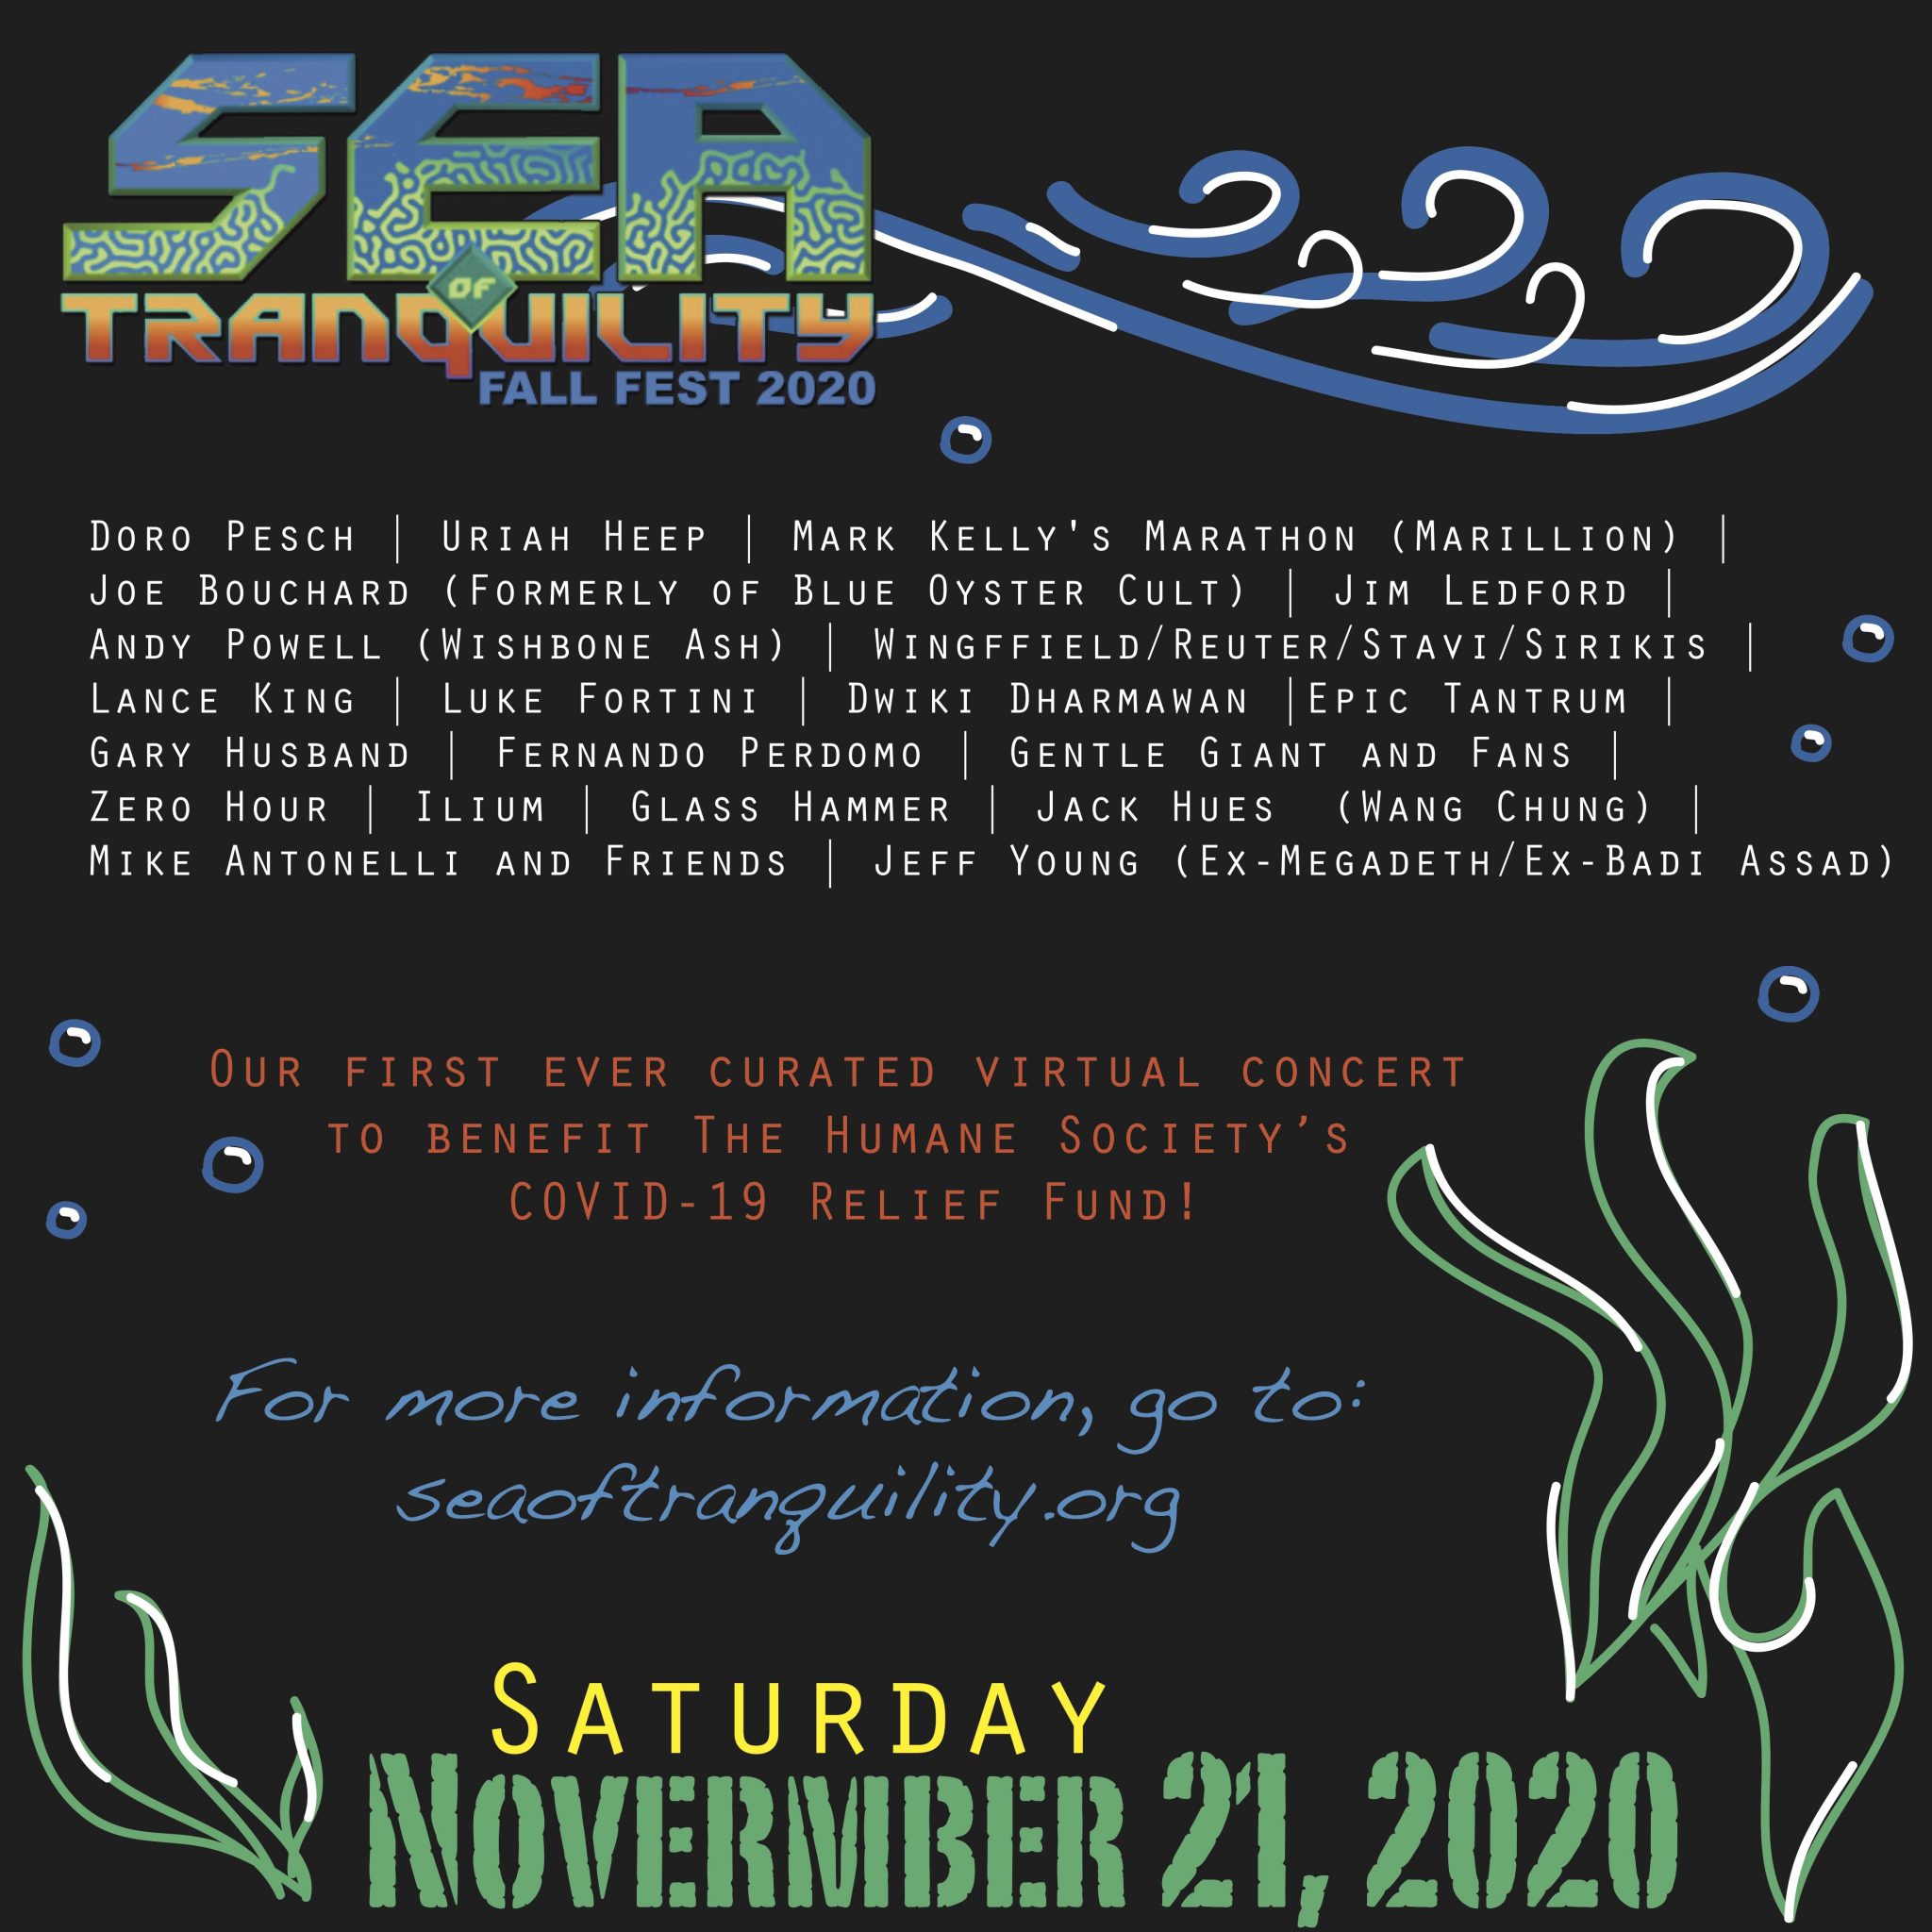 Sea of Tranquility is excited to announce Sea Of Tranquility Fall Fest